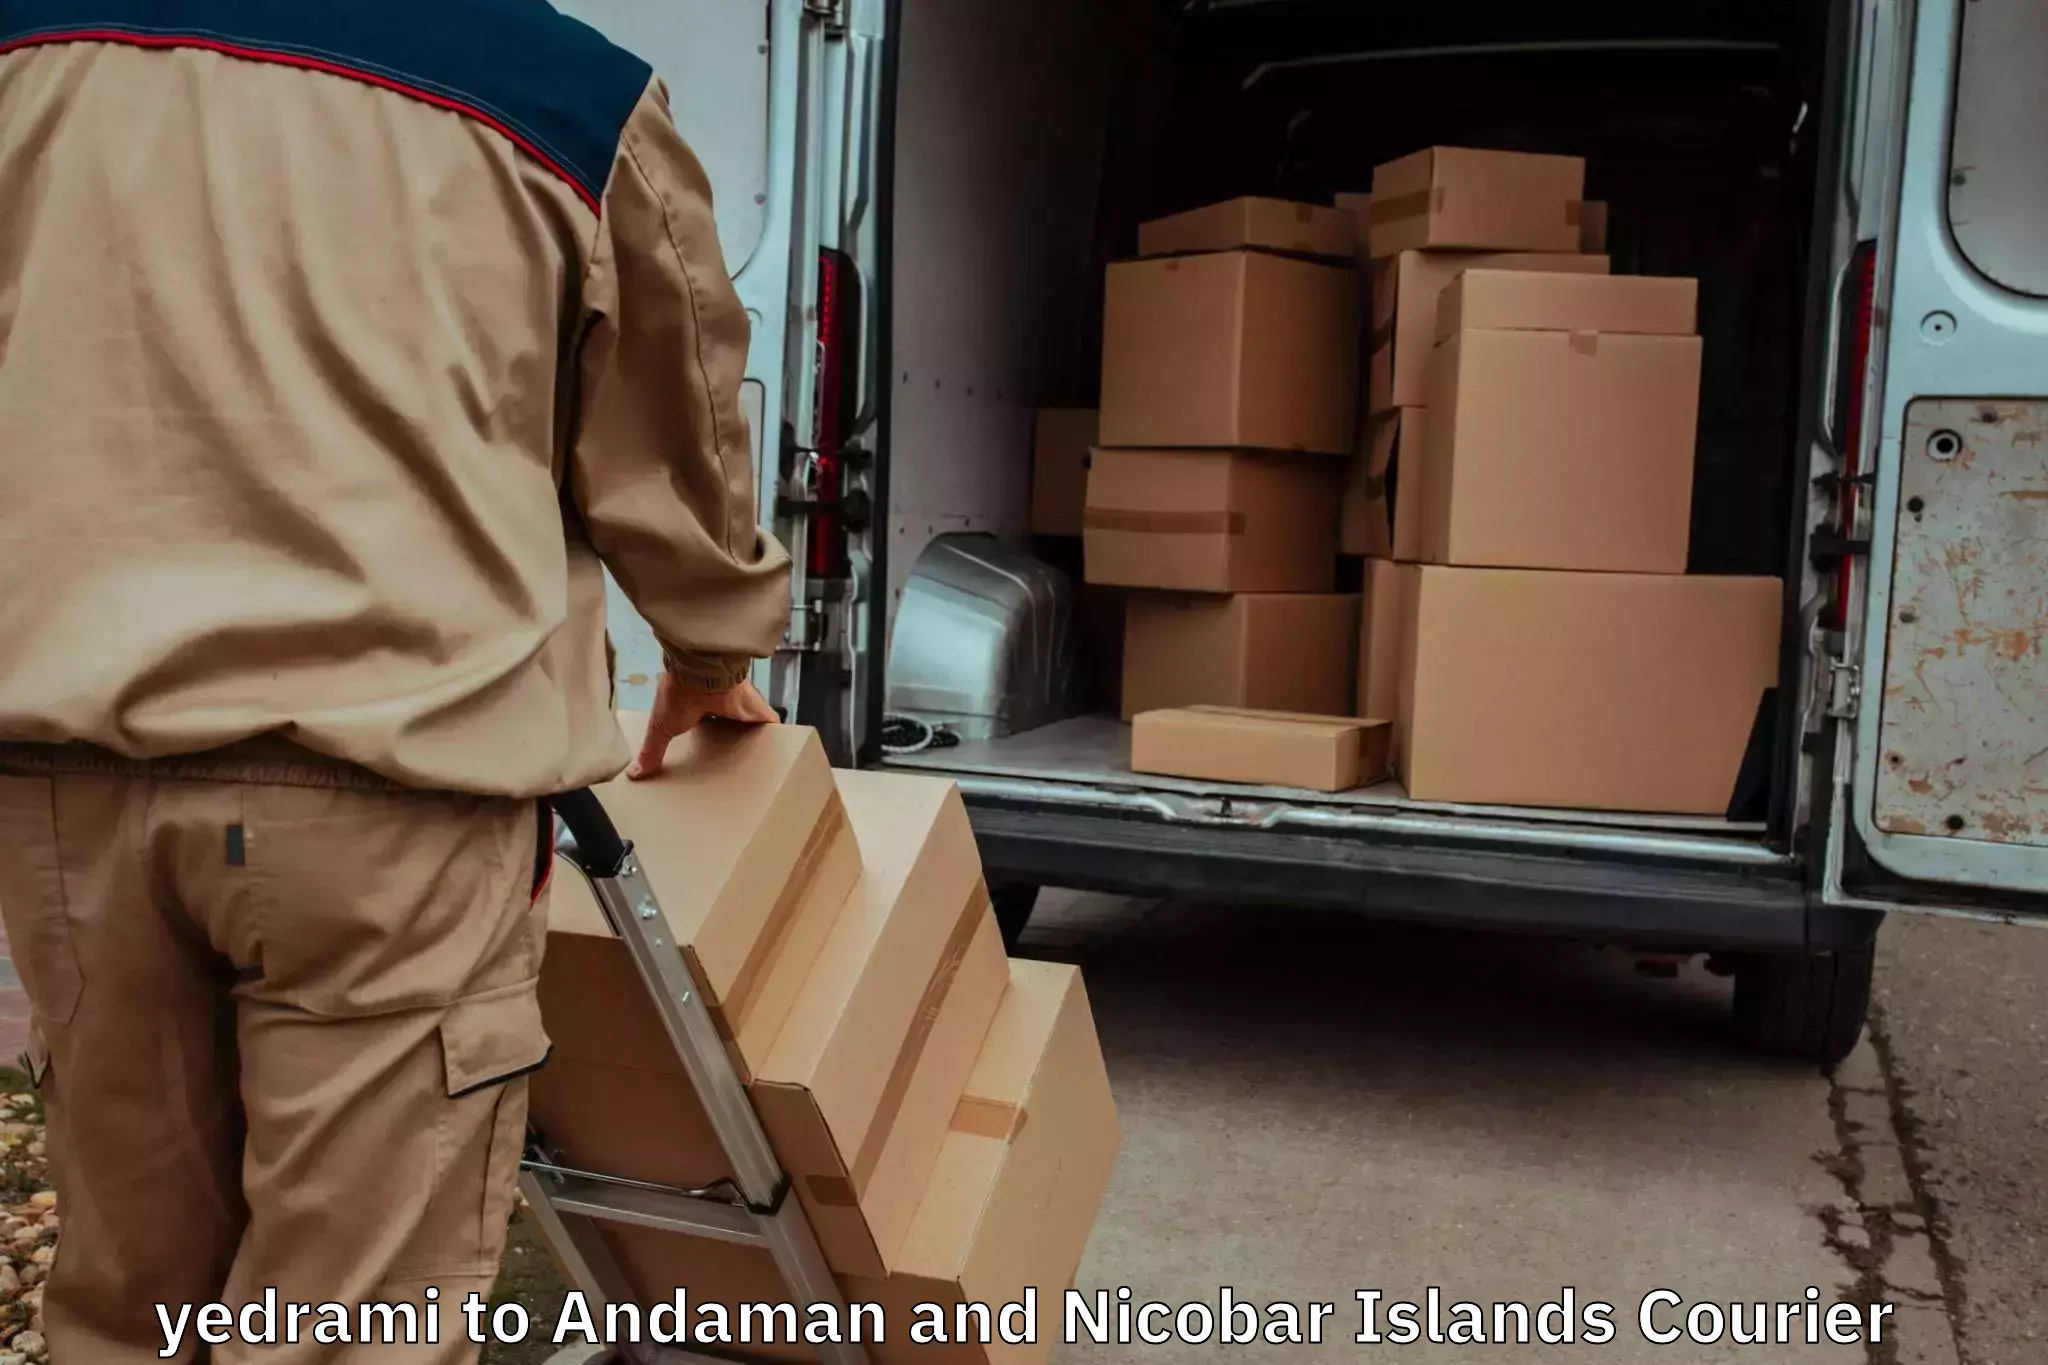 Furniture delivery service yedrami to Andaman and Nicobar Islands